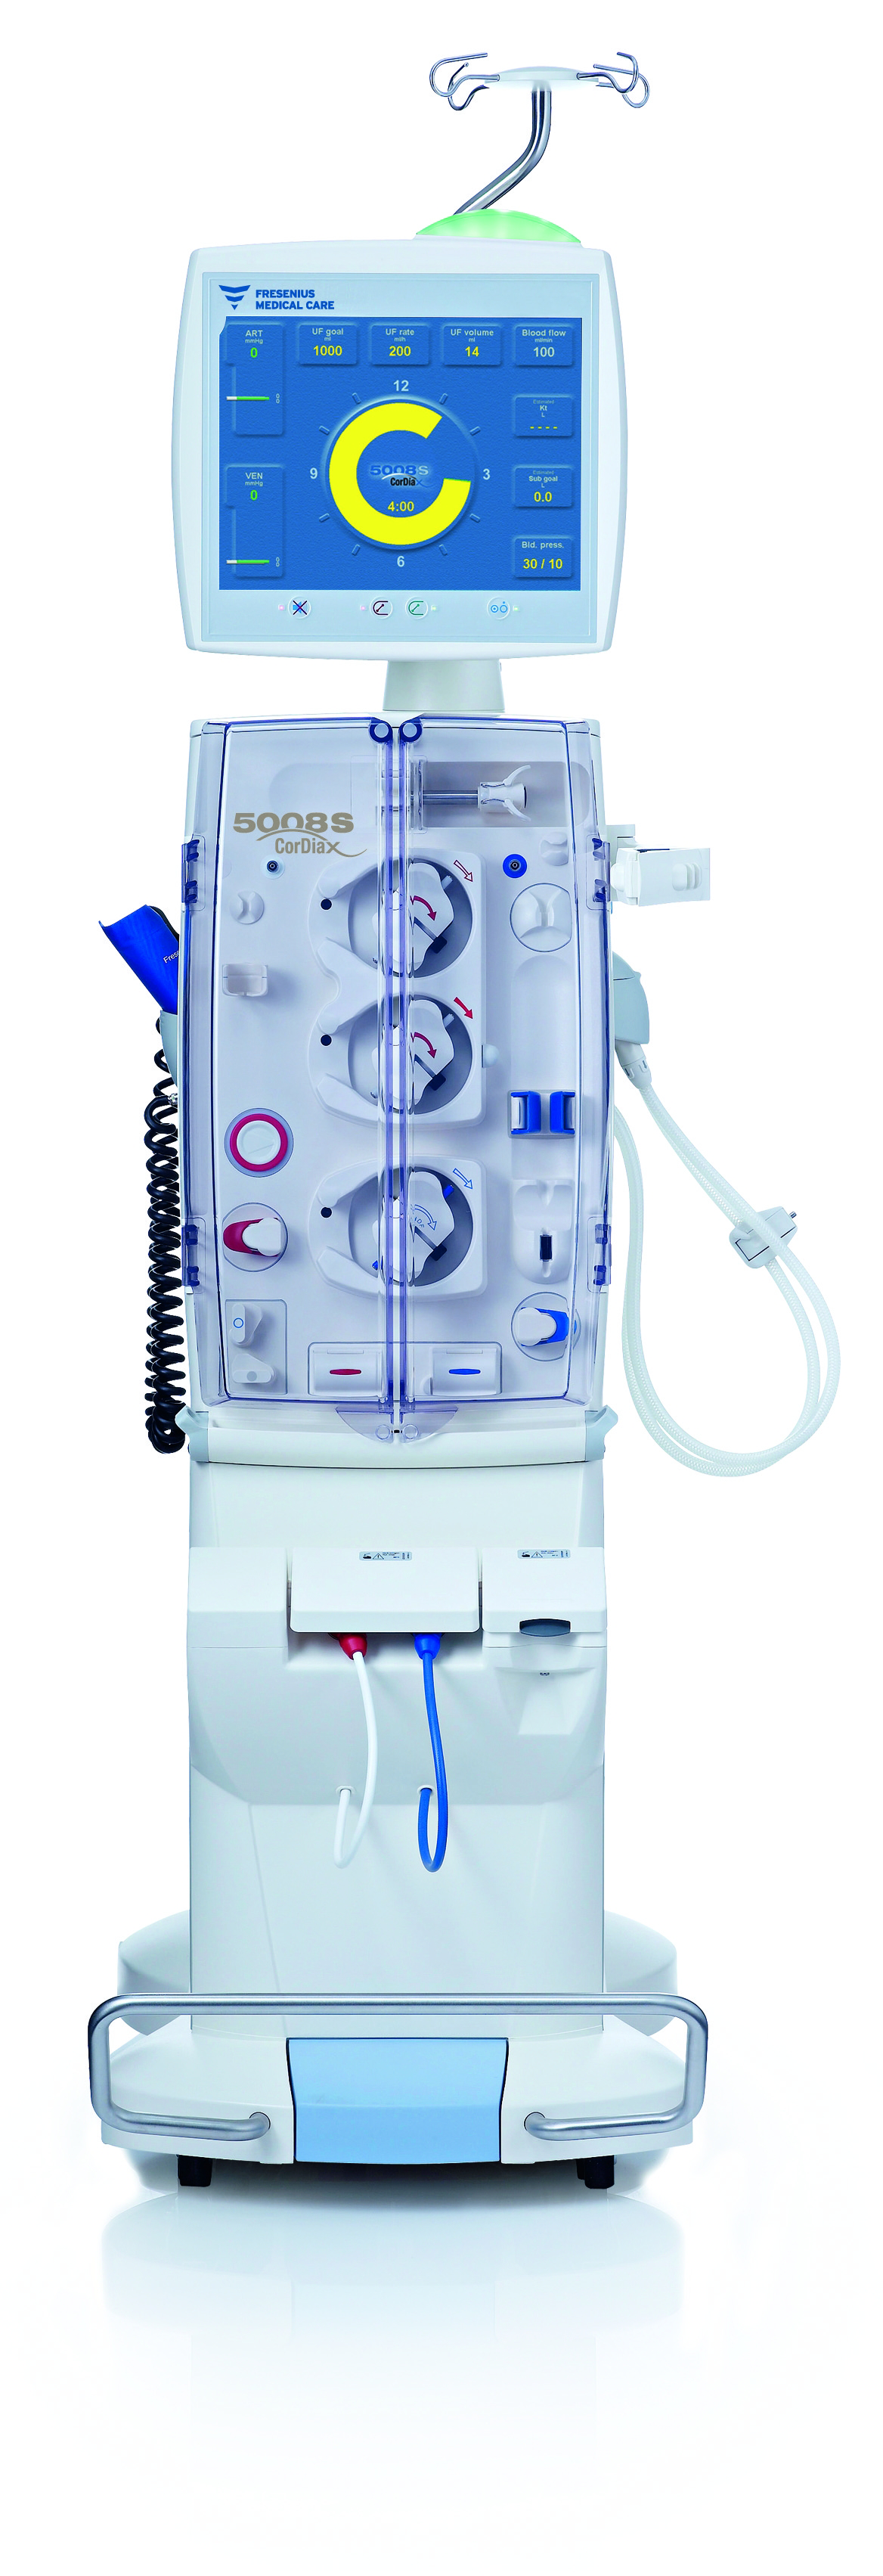 [Translate to German:] Fresenius Medical Care In-center dialysis | 5008S machine